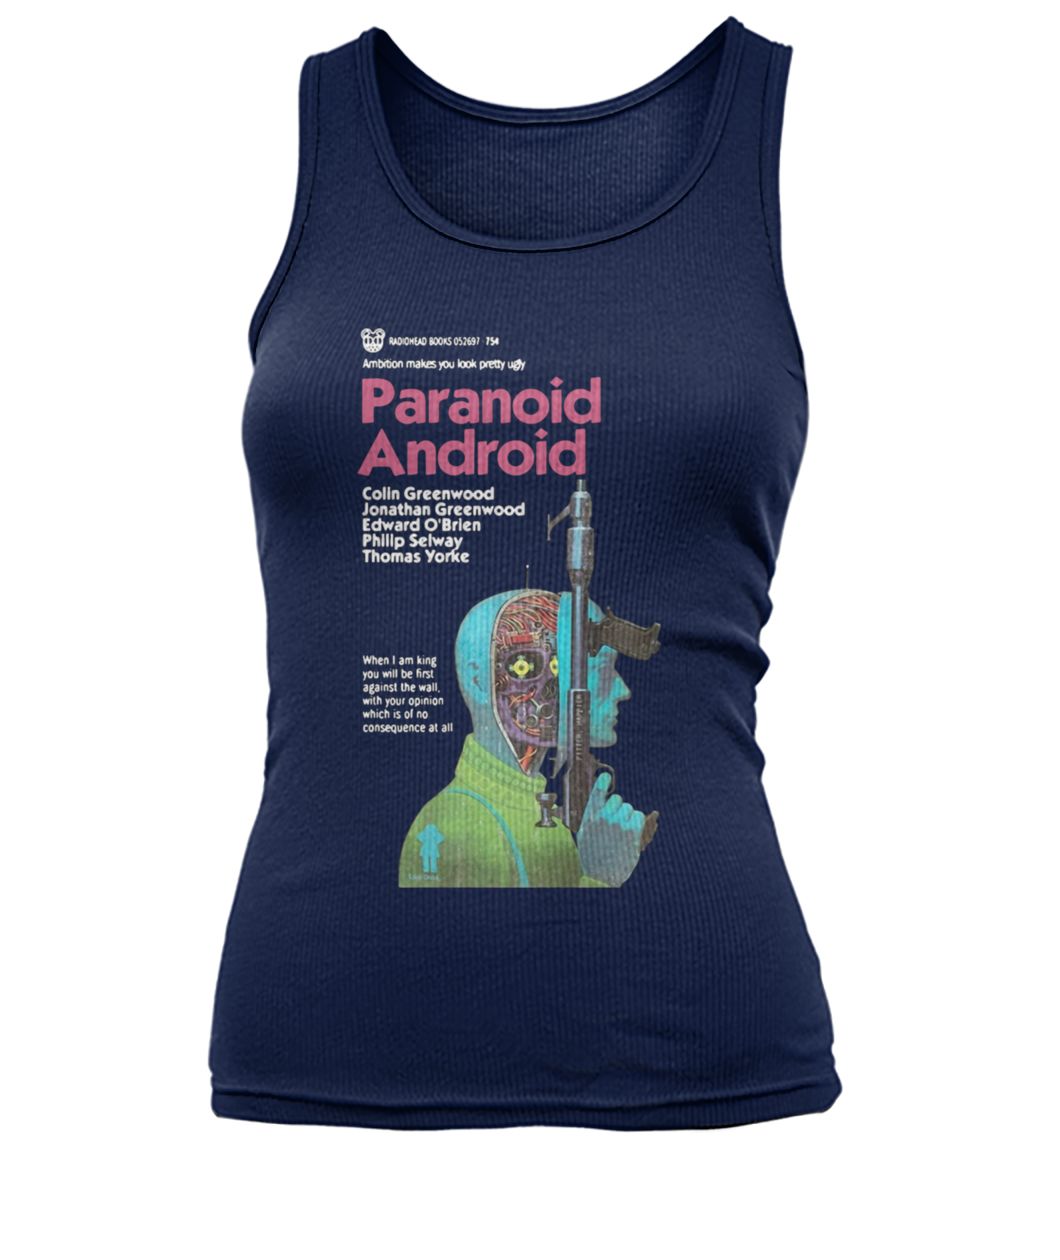 Paranoid android ambition makes you look pretty ugly women's tank top